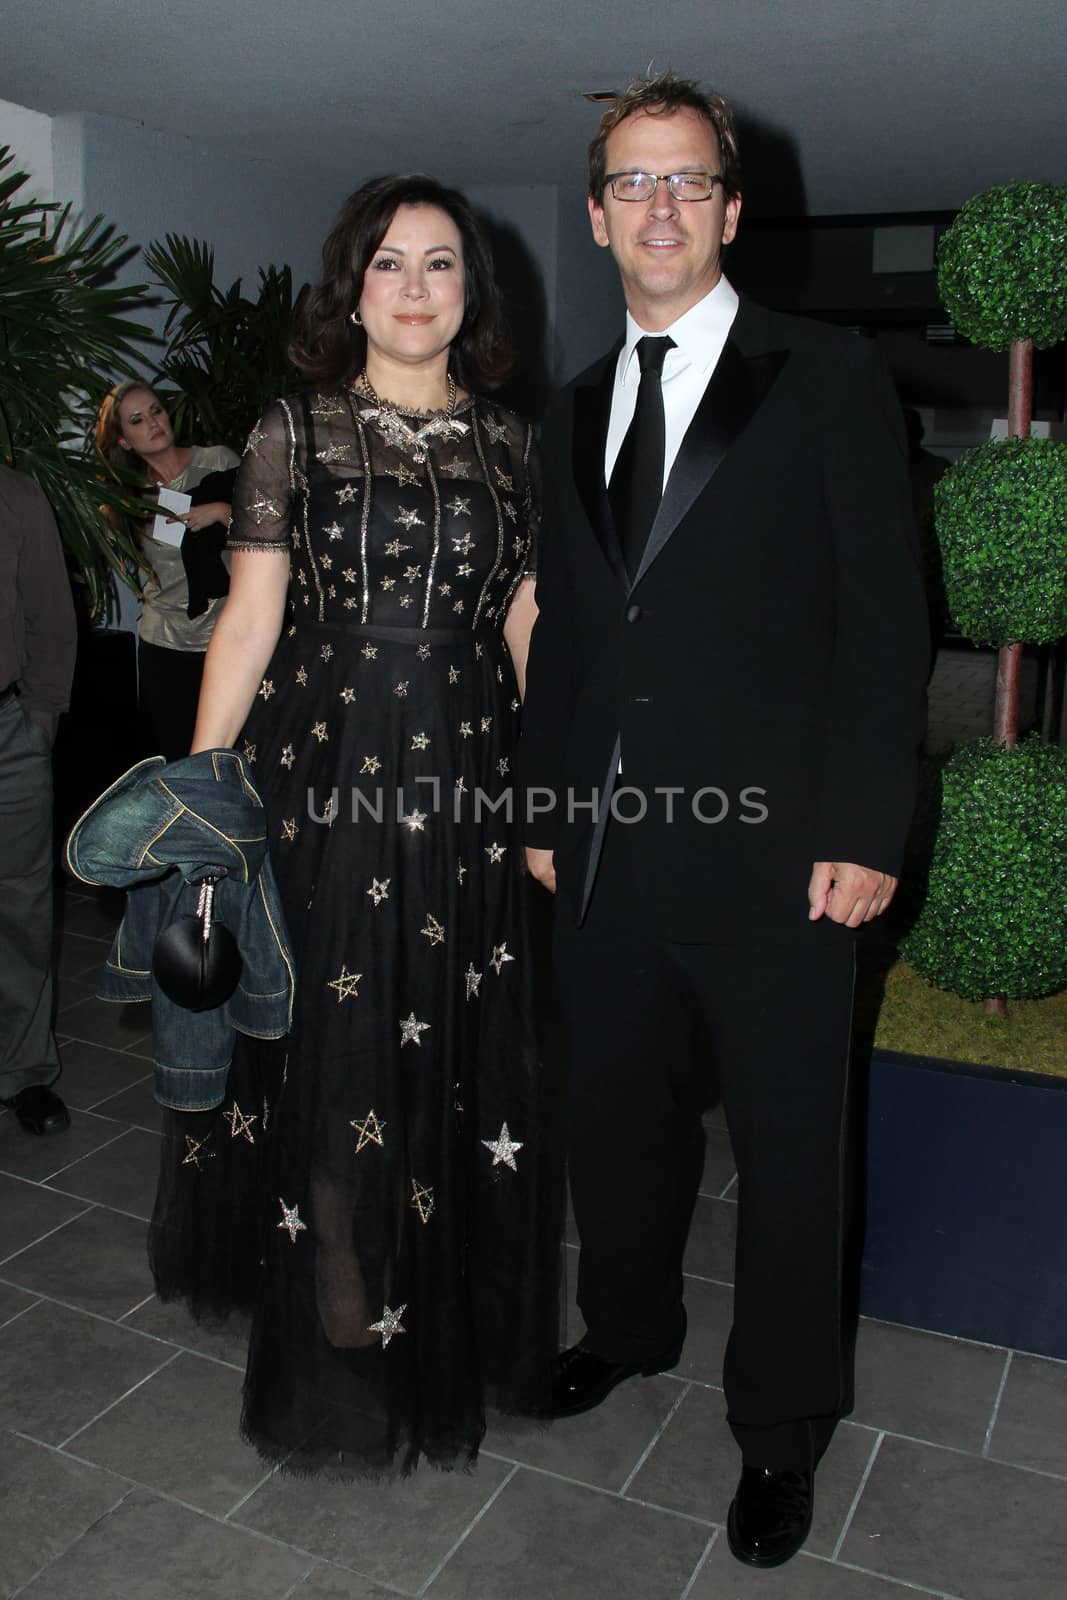 Jennifer Tilly
Mercy For Animals 15th Anniversary Gala, The London, West Hollywood, CA 09-12-14